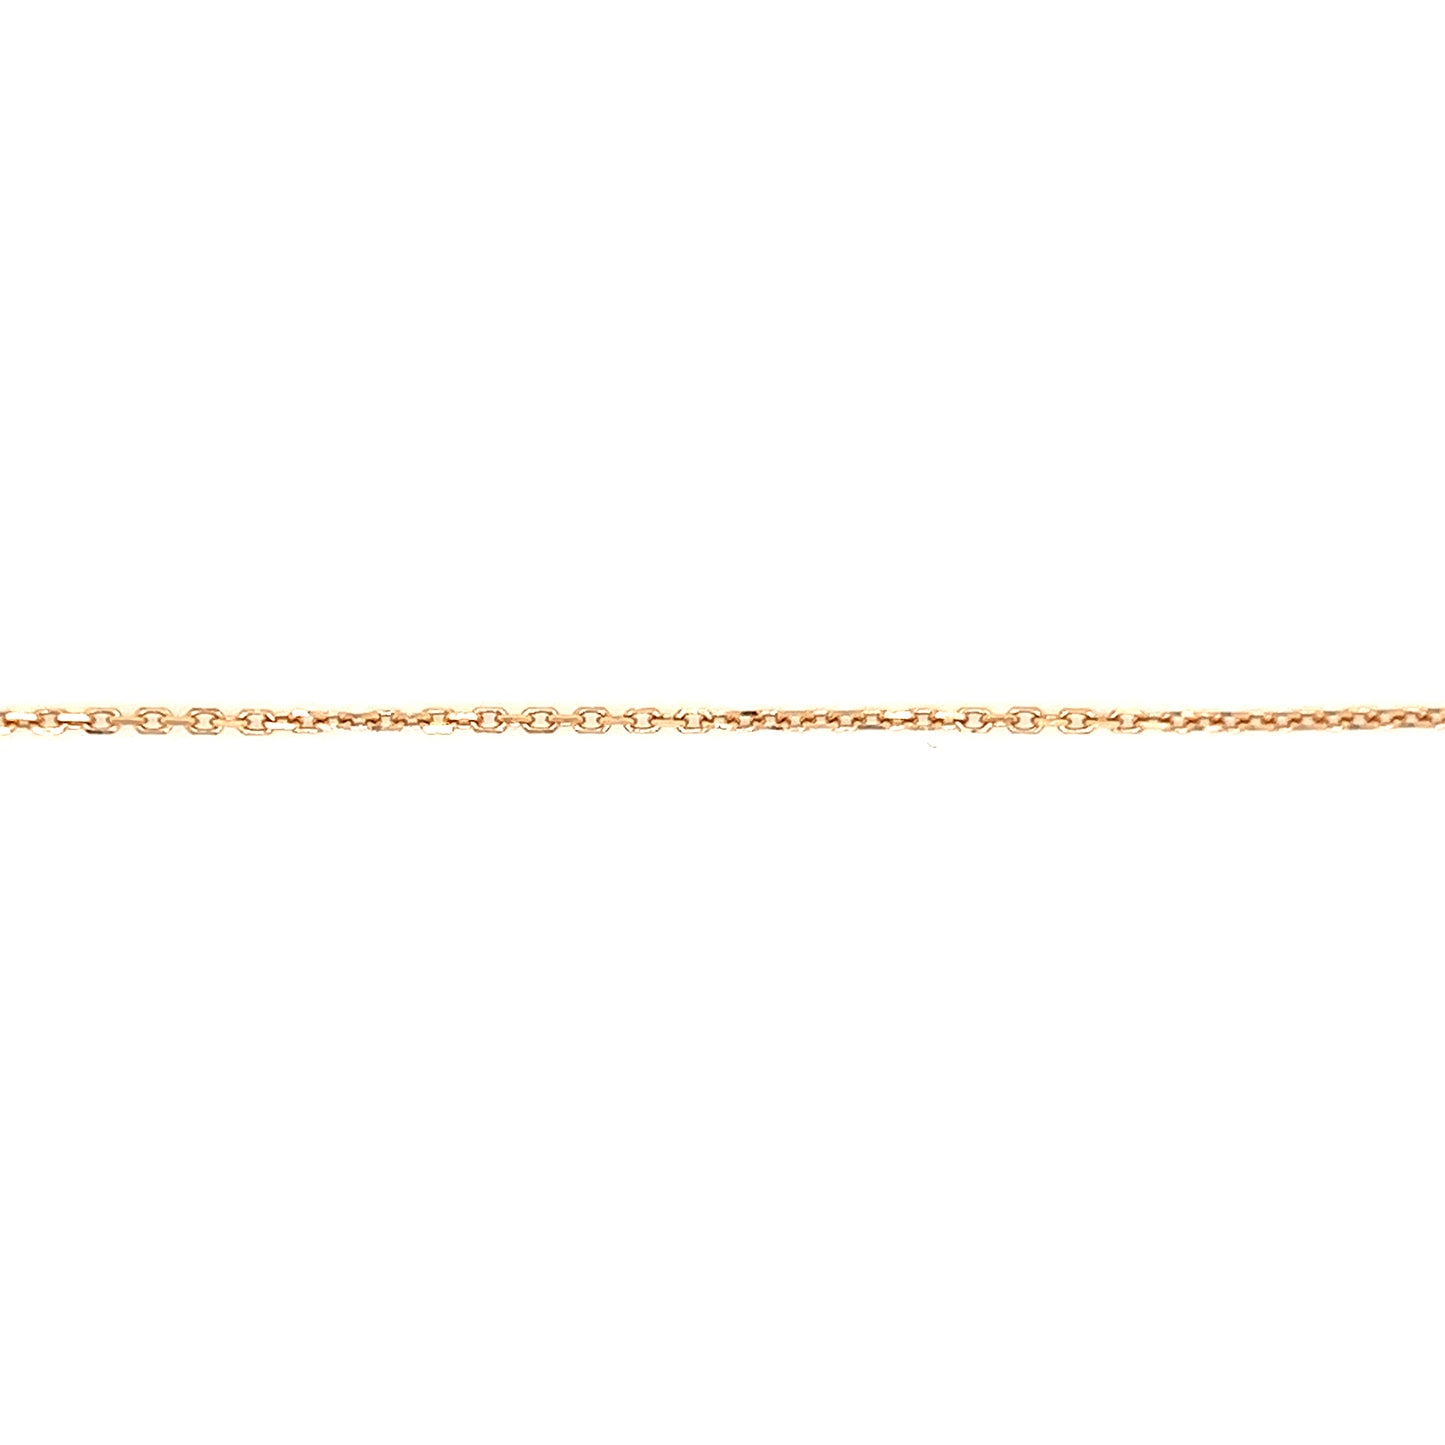 Cable Chain 1.15mm with 24in of Length in 14K Rose Gold Chain View